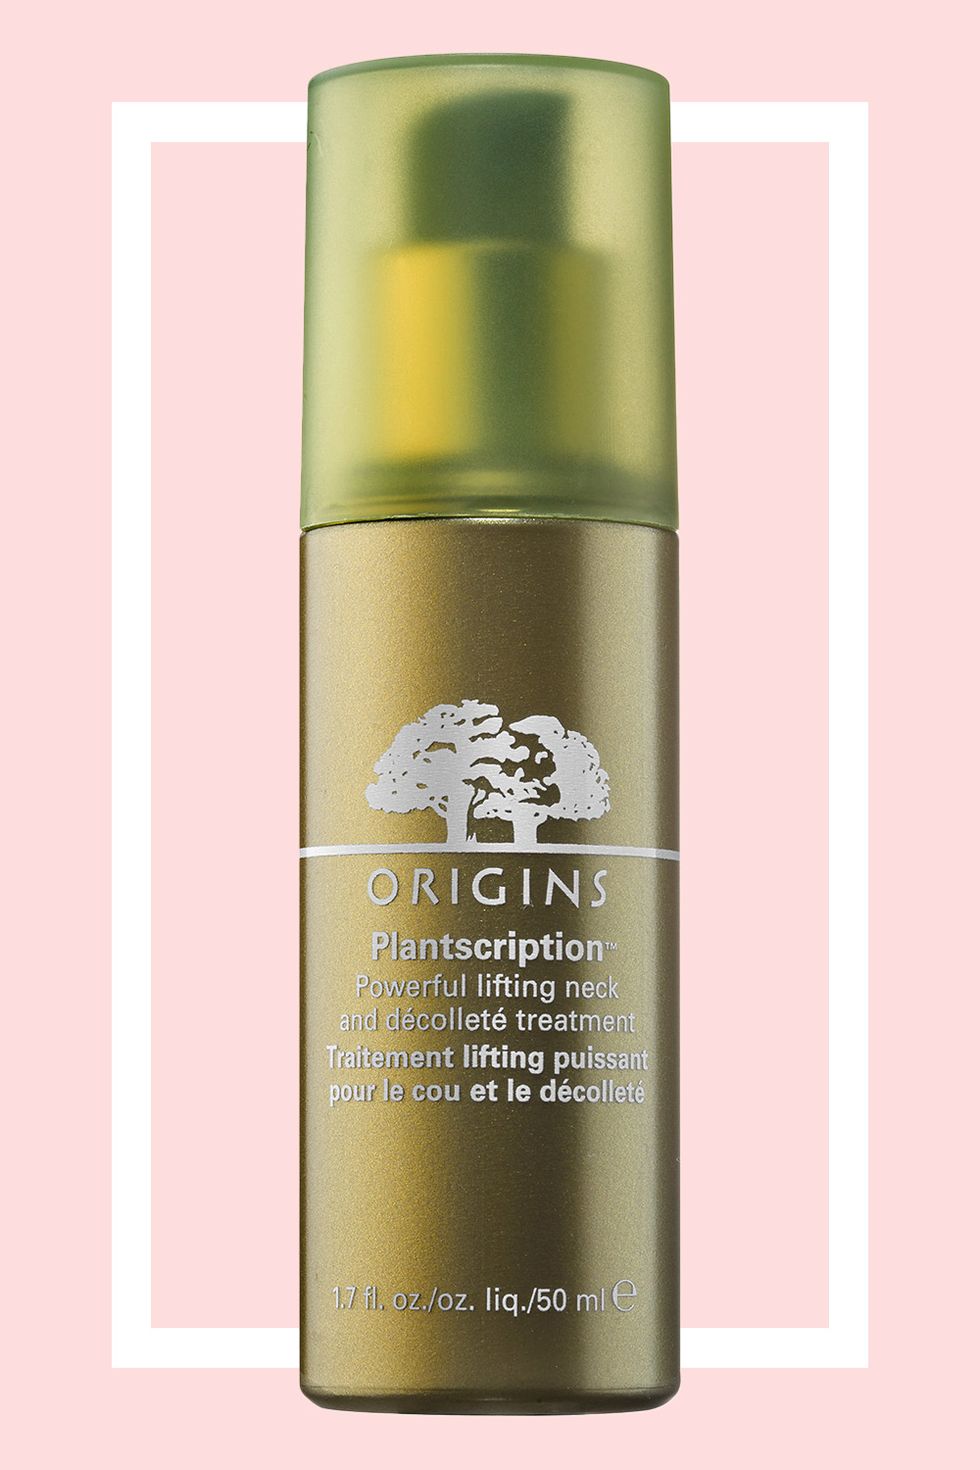 <p>If you prefer a serum to a cream, you'll love this lightweight, plant-based formula for the neck and chest area. It not only hydrates thirsty skin, but has a laundry list of gentle botanicals and vitamins that work together for smoother, bouncier looking skin in a matter of weeks.</p><p>Origins Plantscription Anti-Aging Power Serum, $58; <a href="http://bit.ly/29JusvZ" target="_blank">beauty.com</a>.</p>